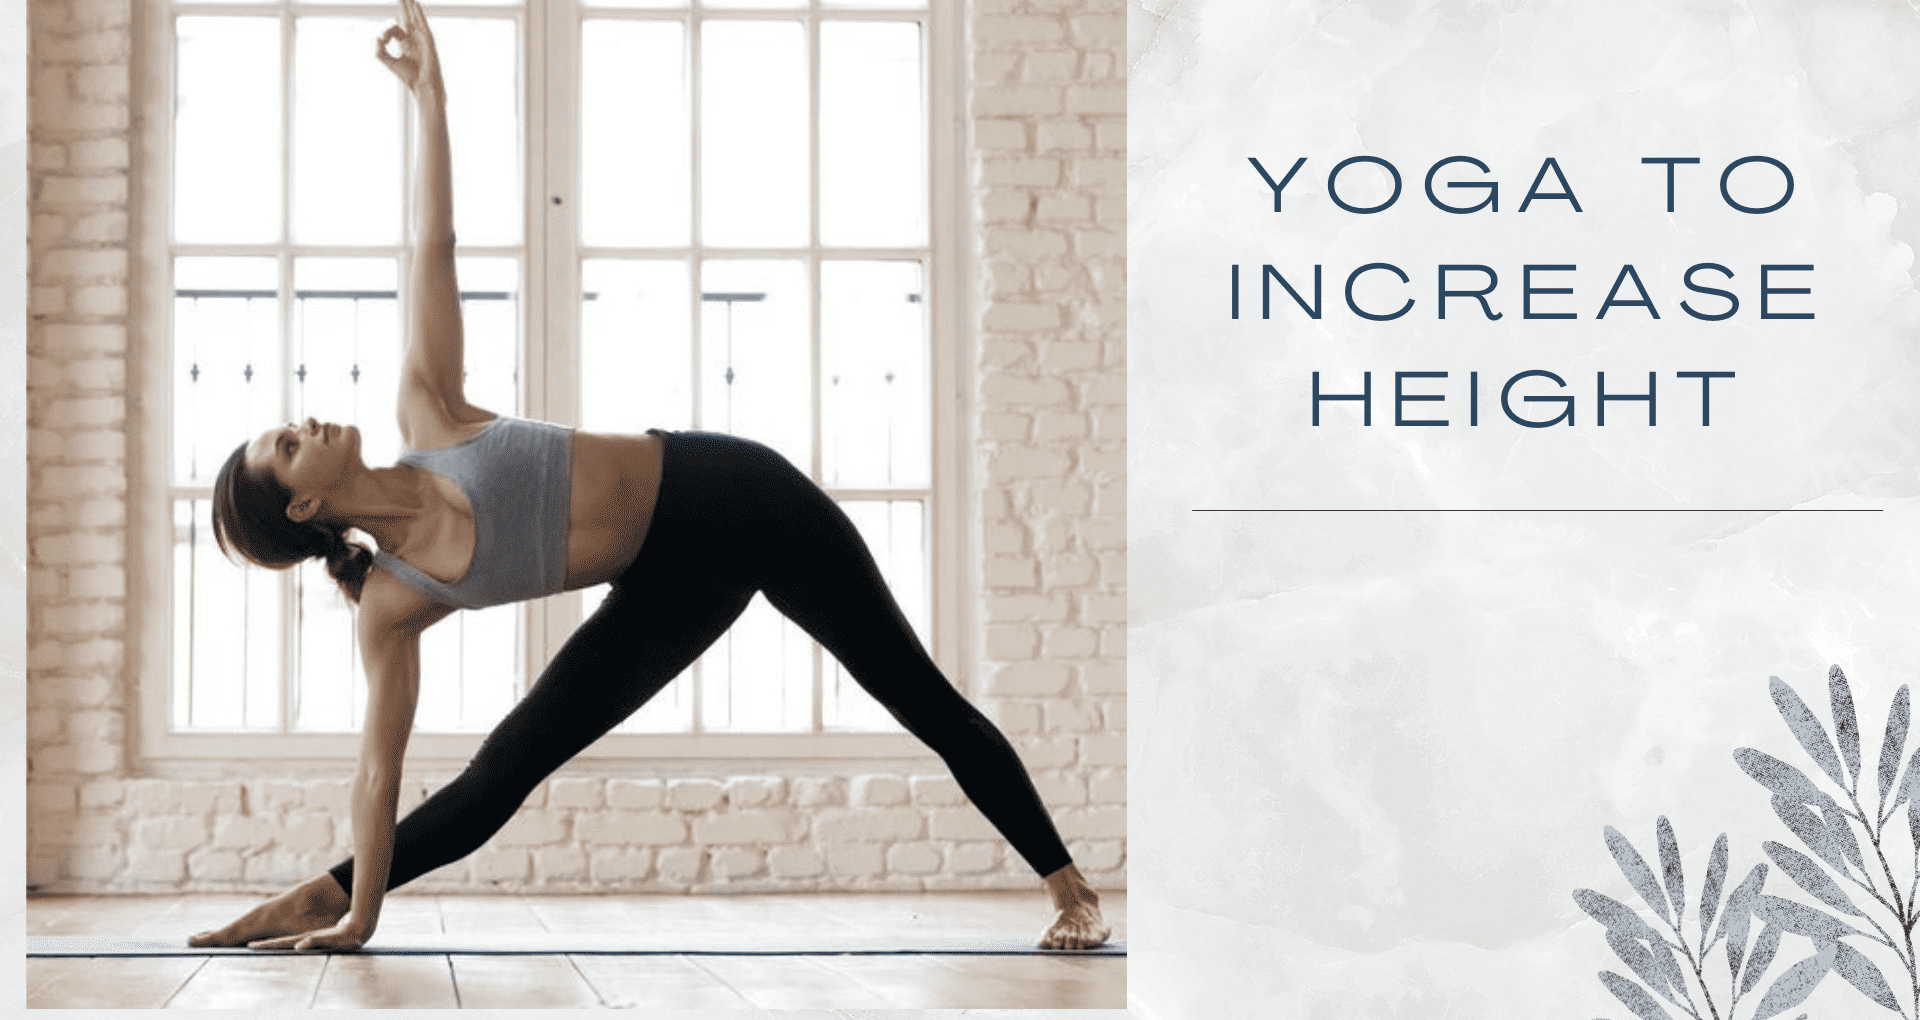 4 Easy Yoga Poses to Improve Your Focus and Concentration